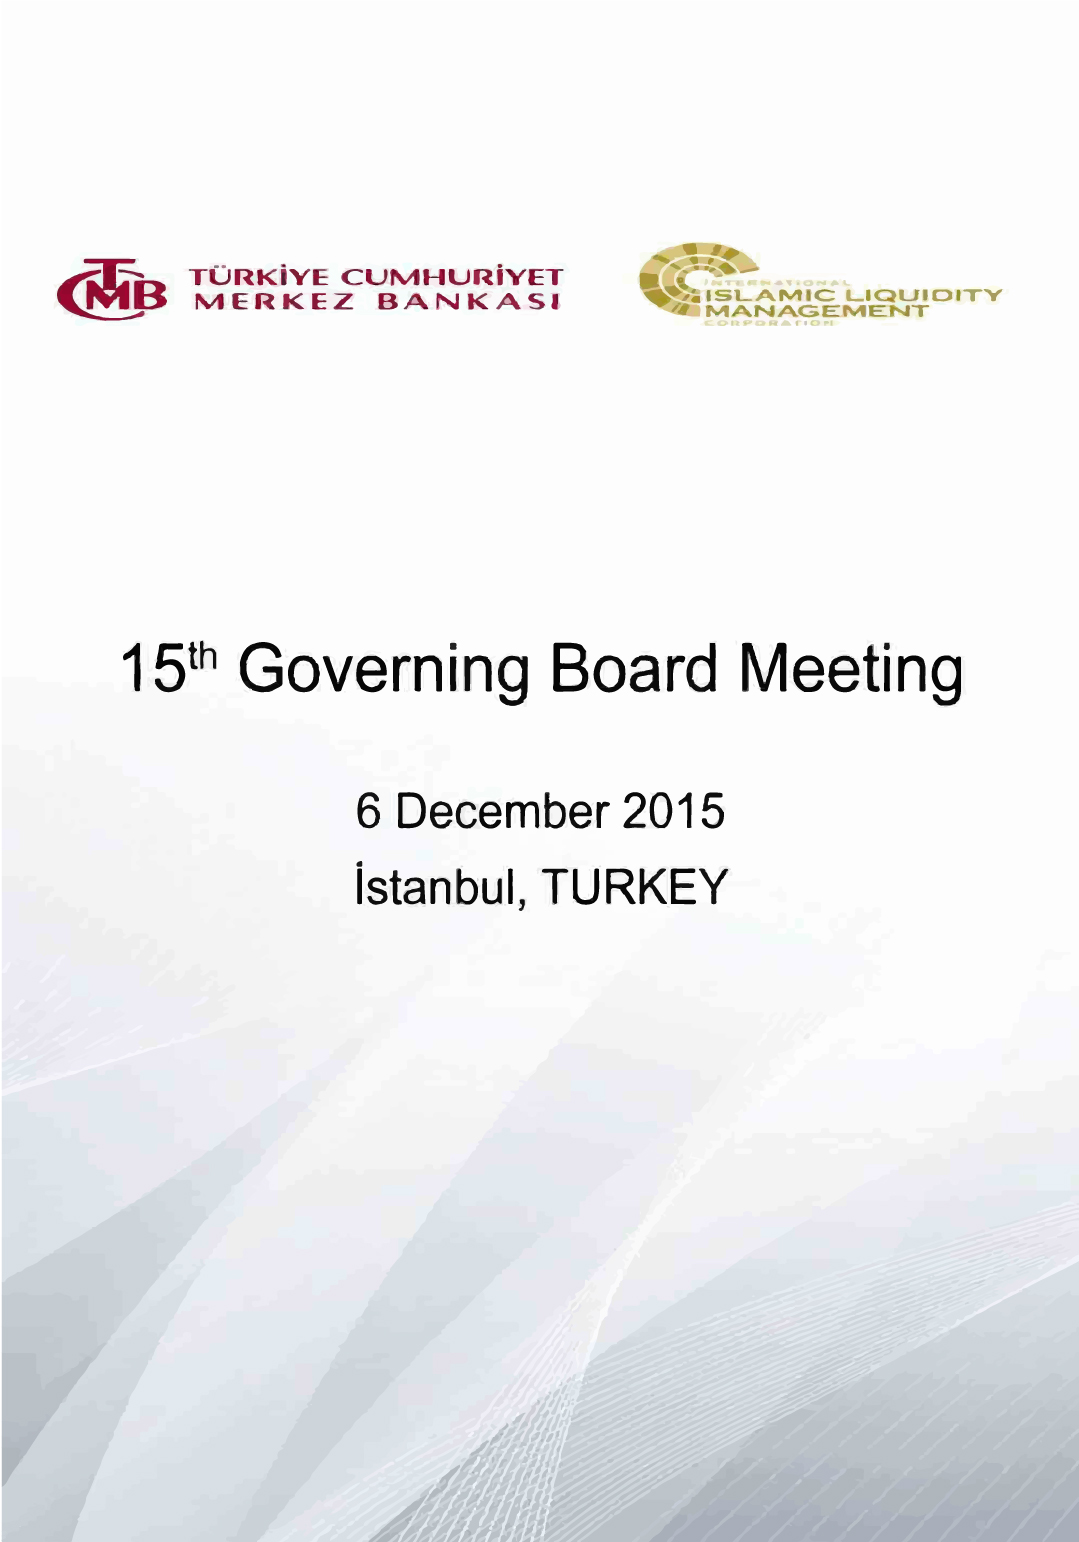 TCMB 15th Governing Board Meeting